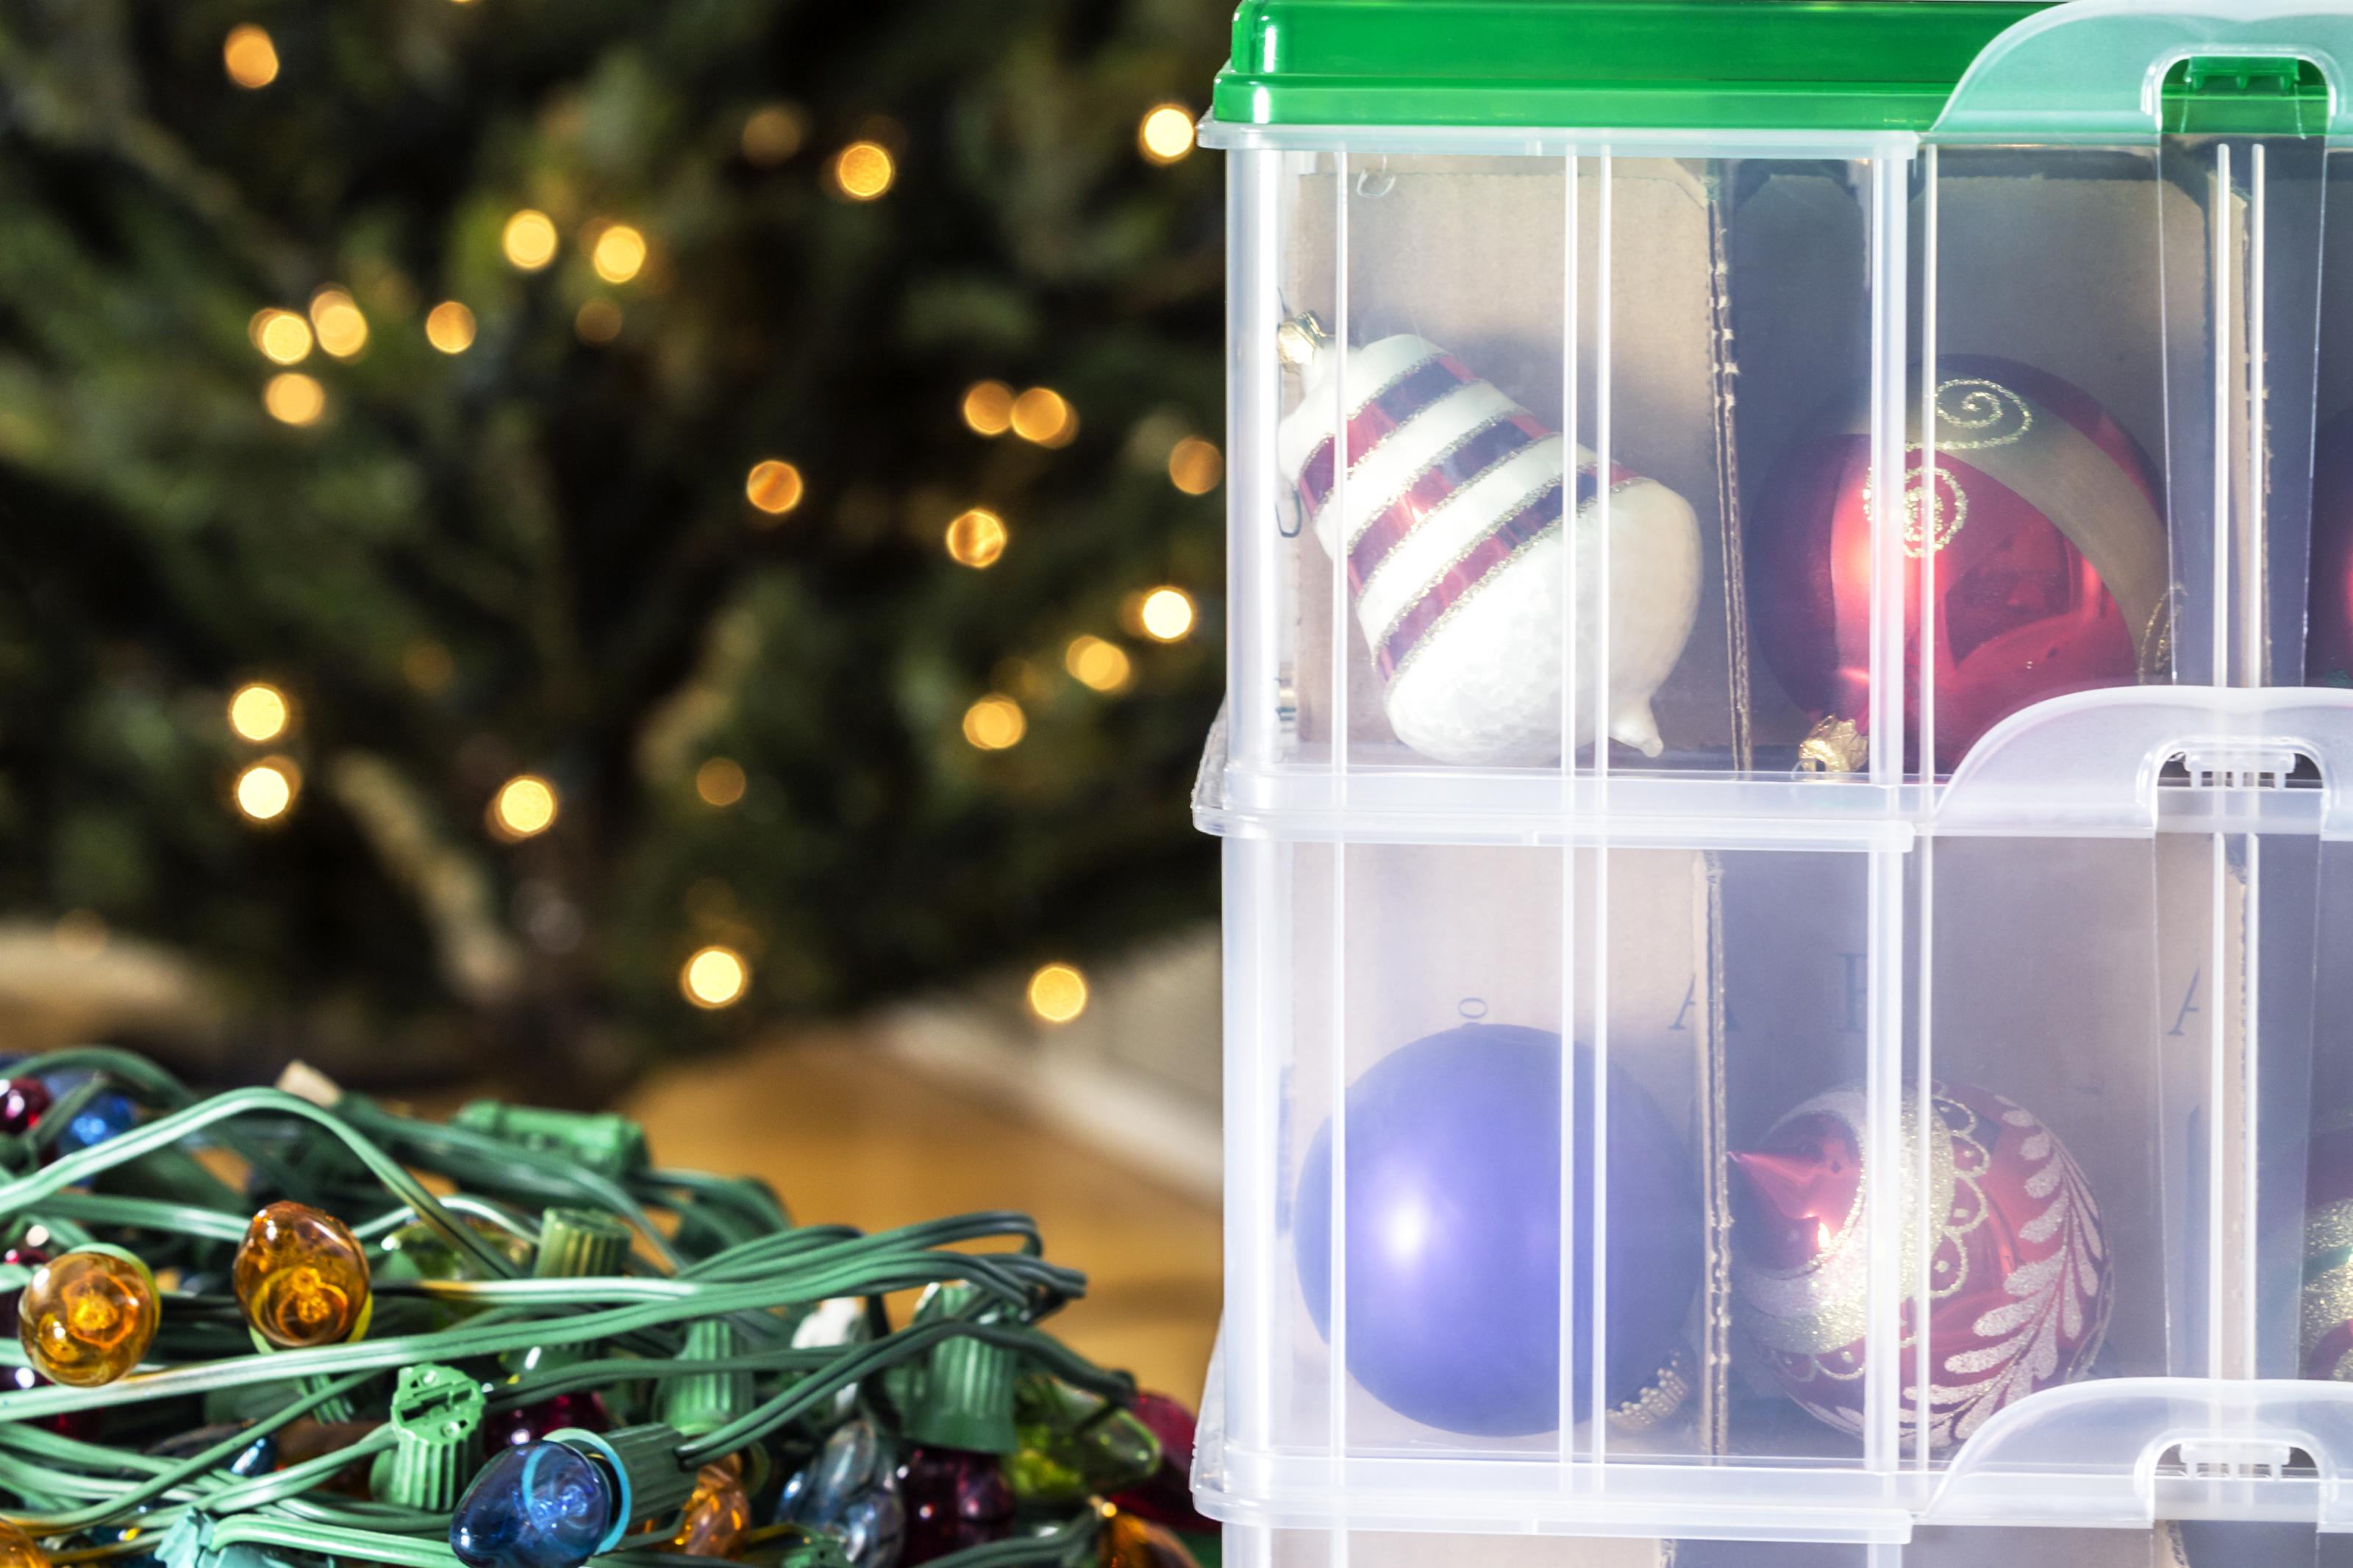 Holiday Organization and Storage Tips for Your Decorations and Gear